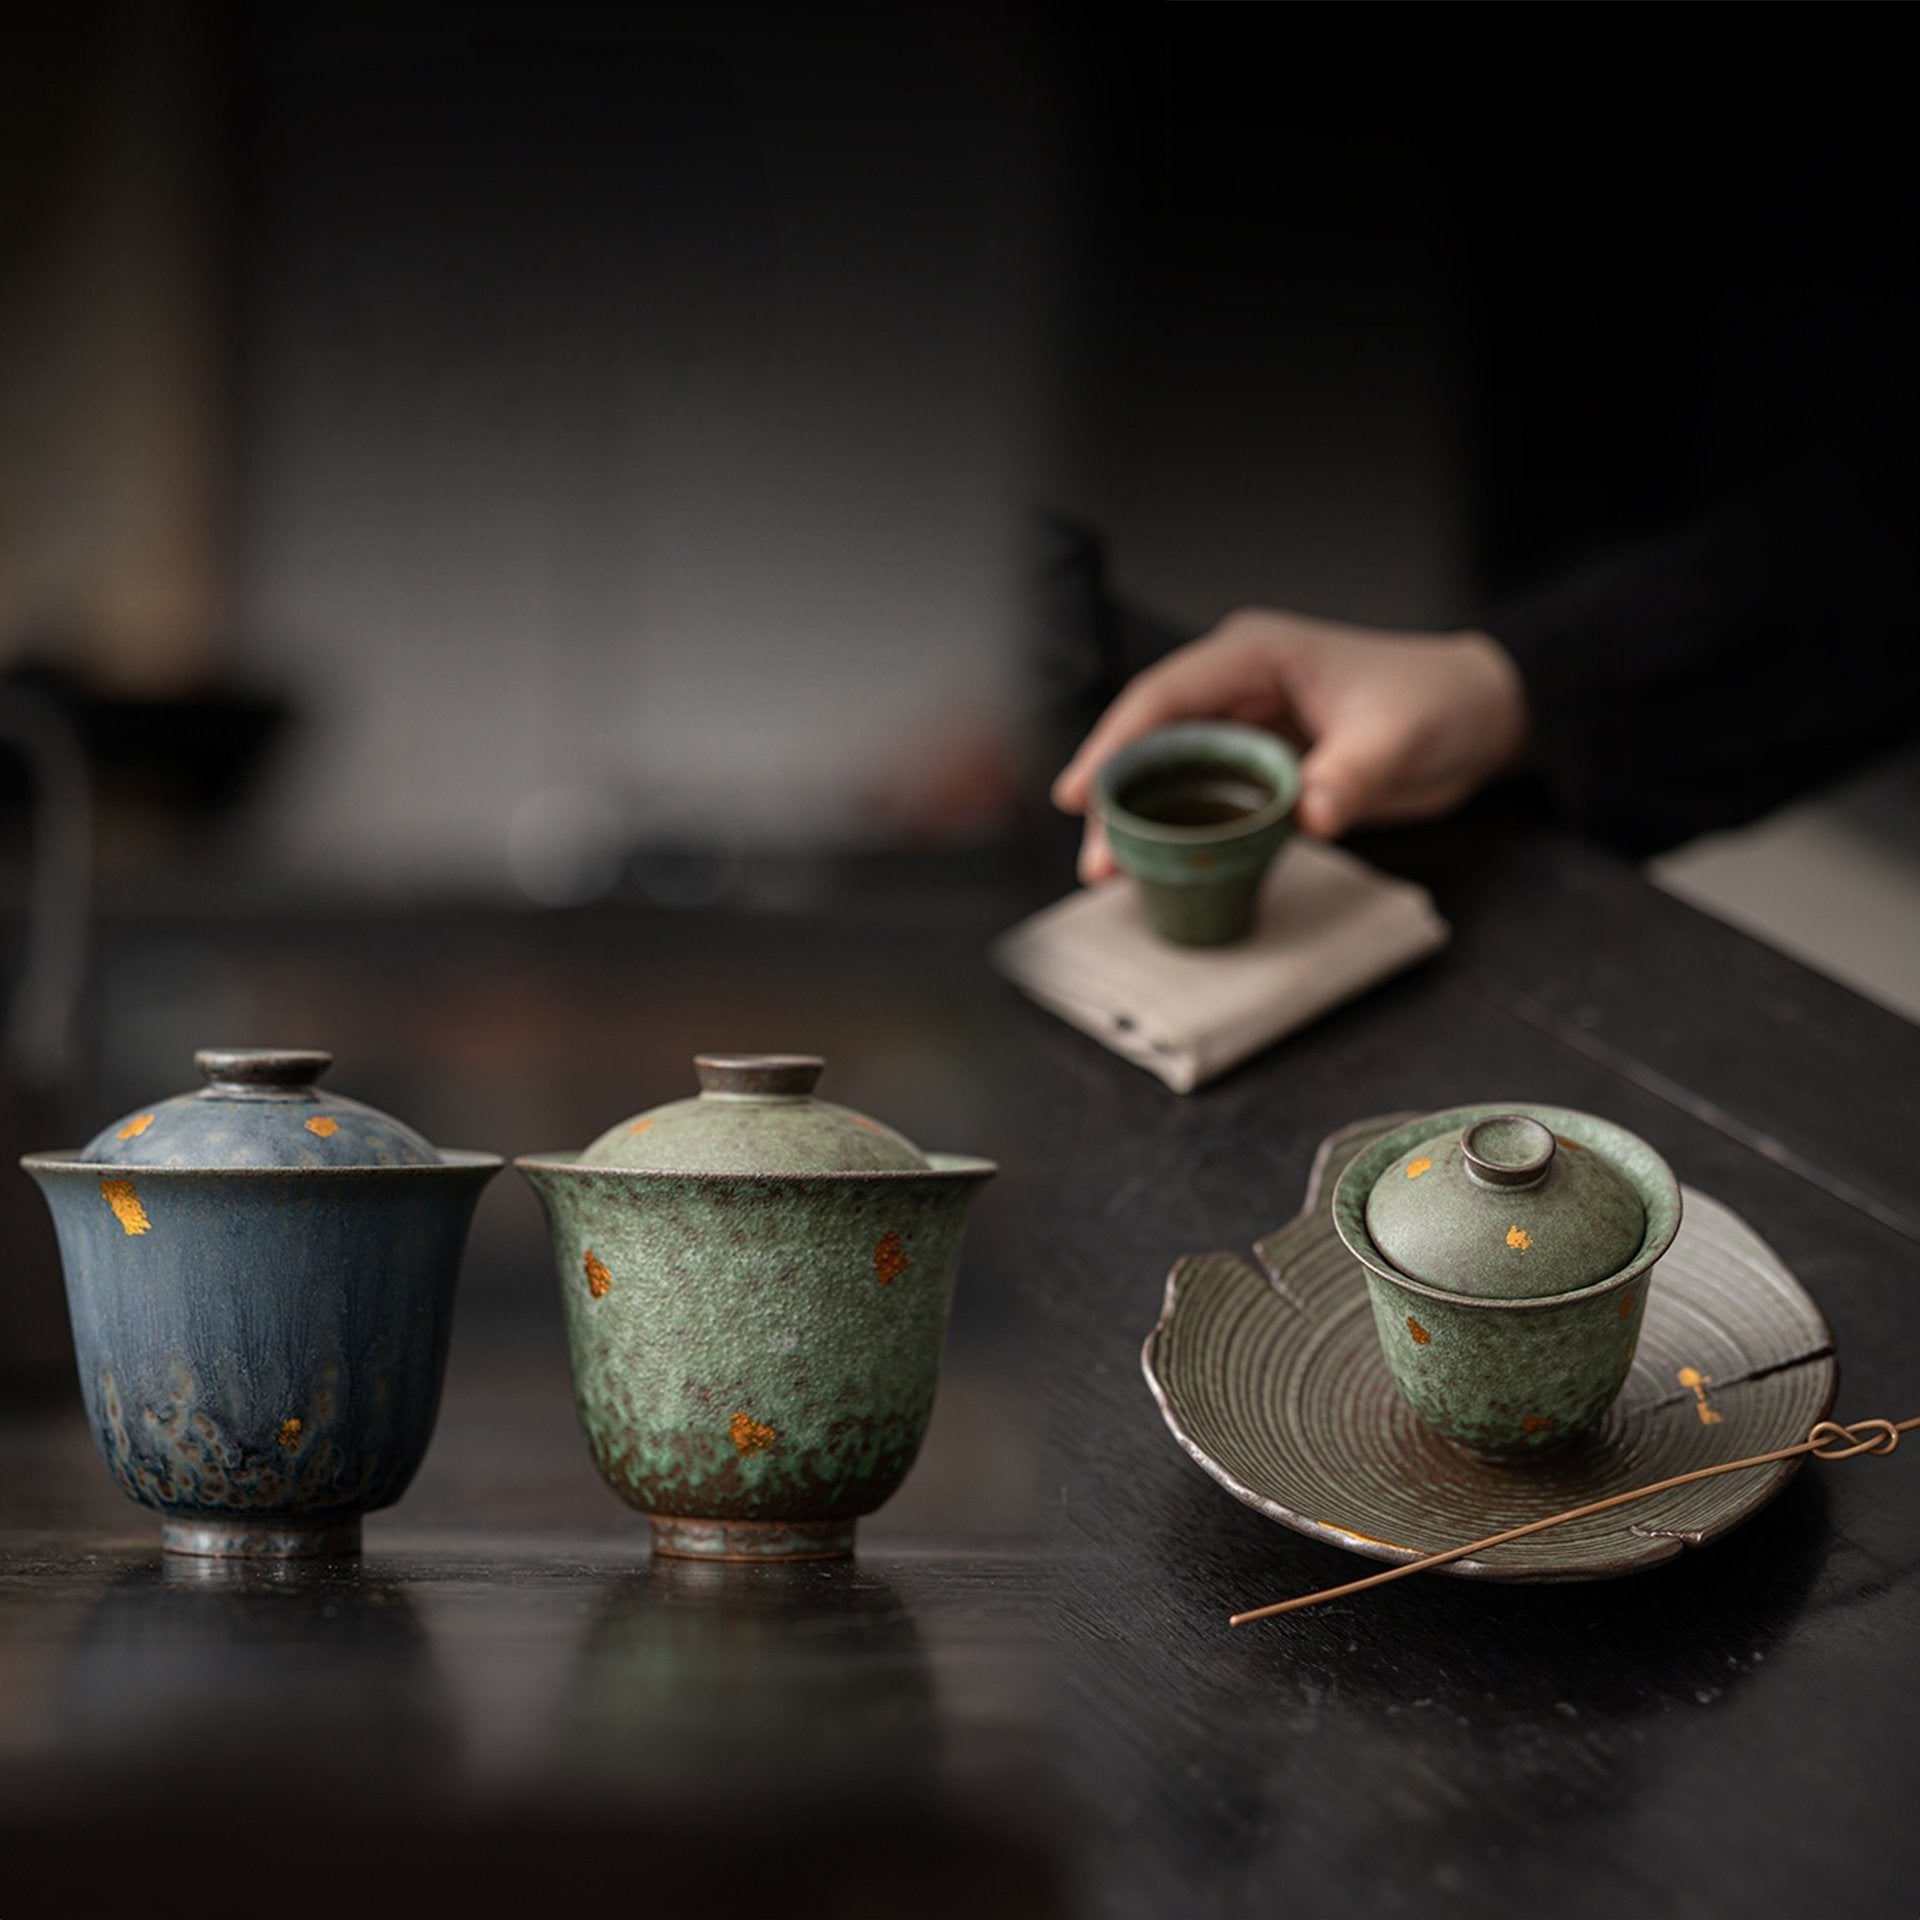 Vintage teapots and cup on a dark wooden table with a hand in view